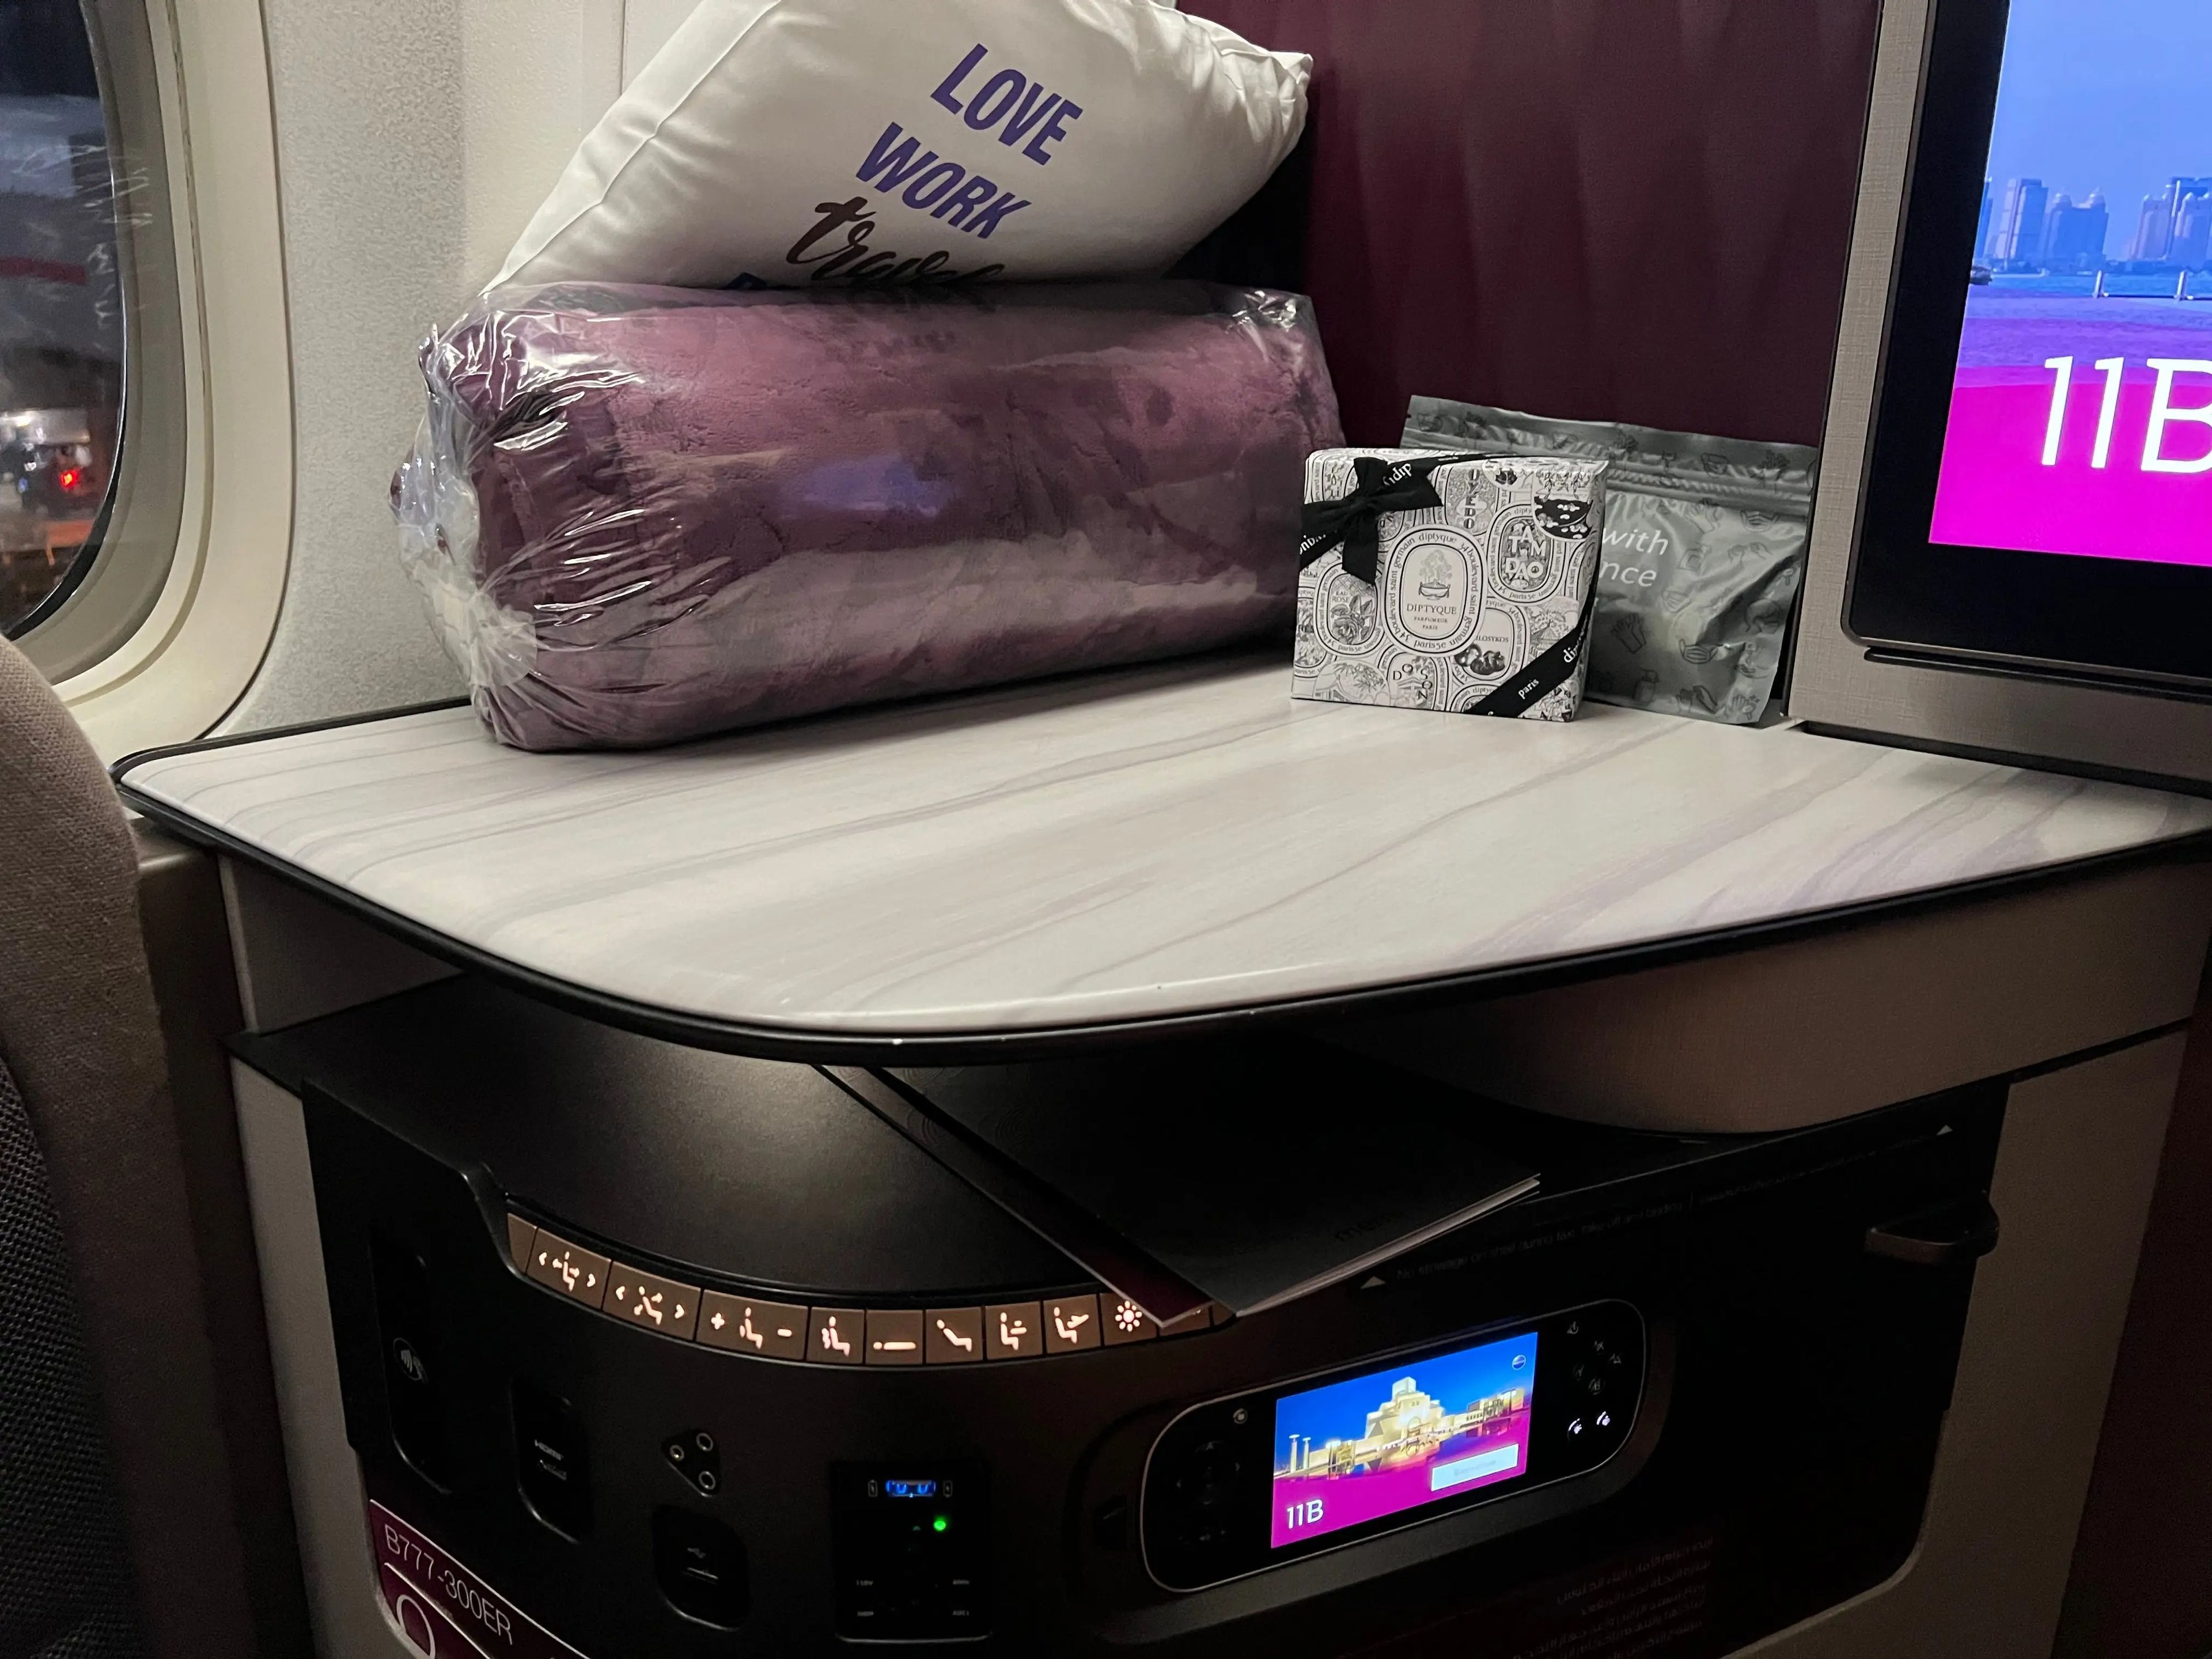 The seat had an amenity kit, noise-canceling headphones, a plush blanket, and two pillows.